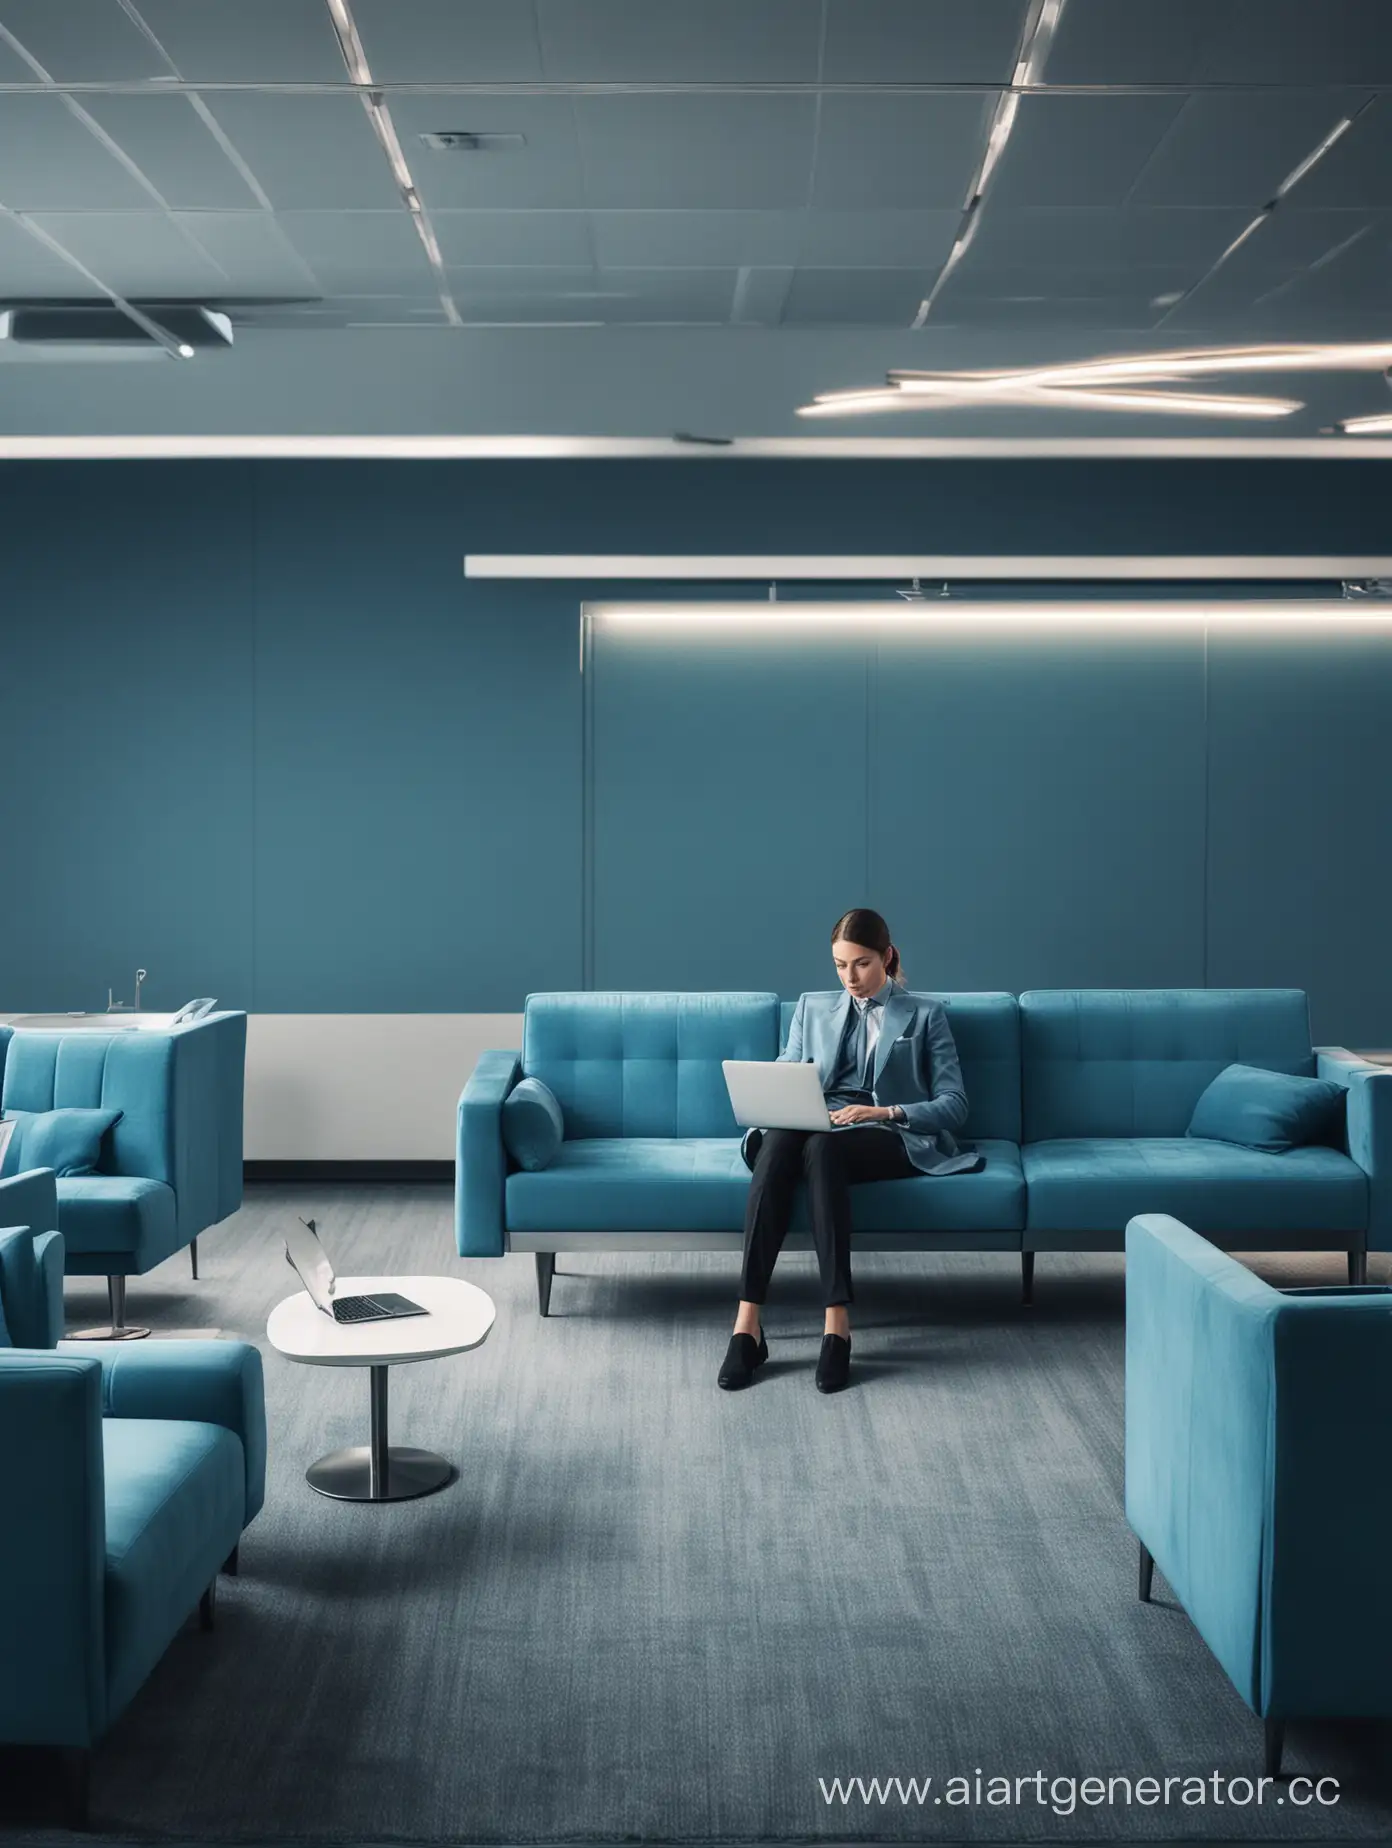 Airport-Lounge-Work-Space-with-Comfortable-Seating-and-Modern-Design